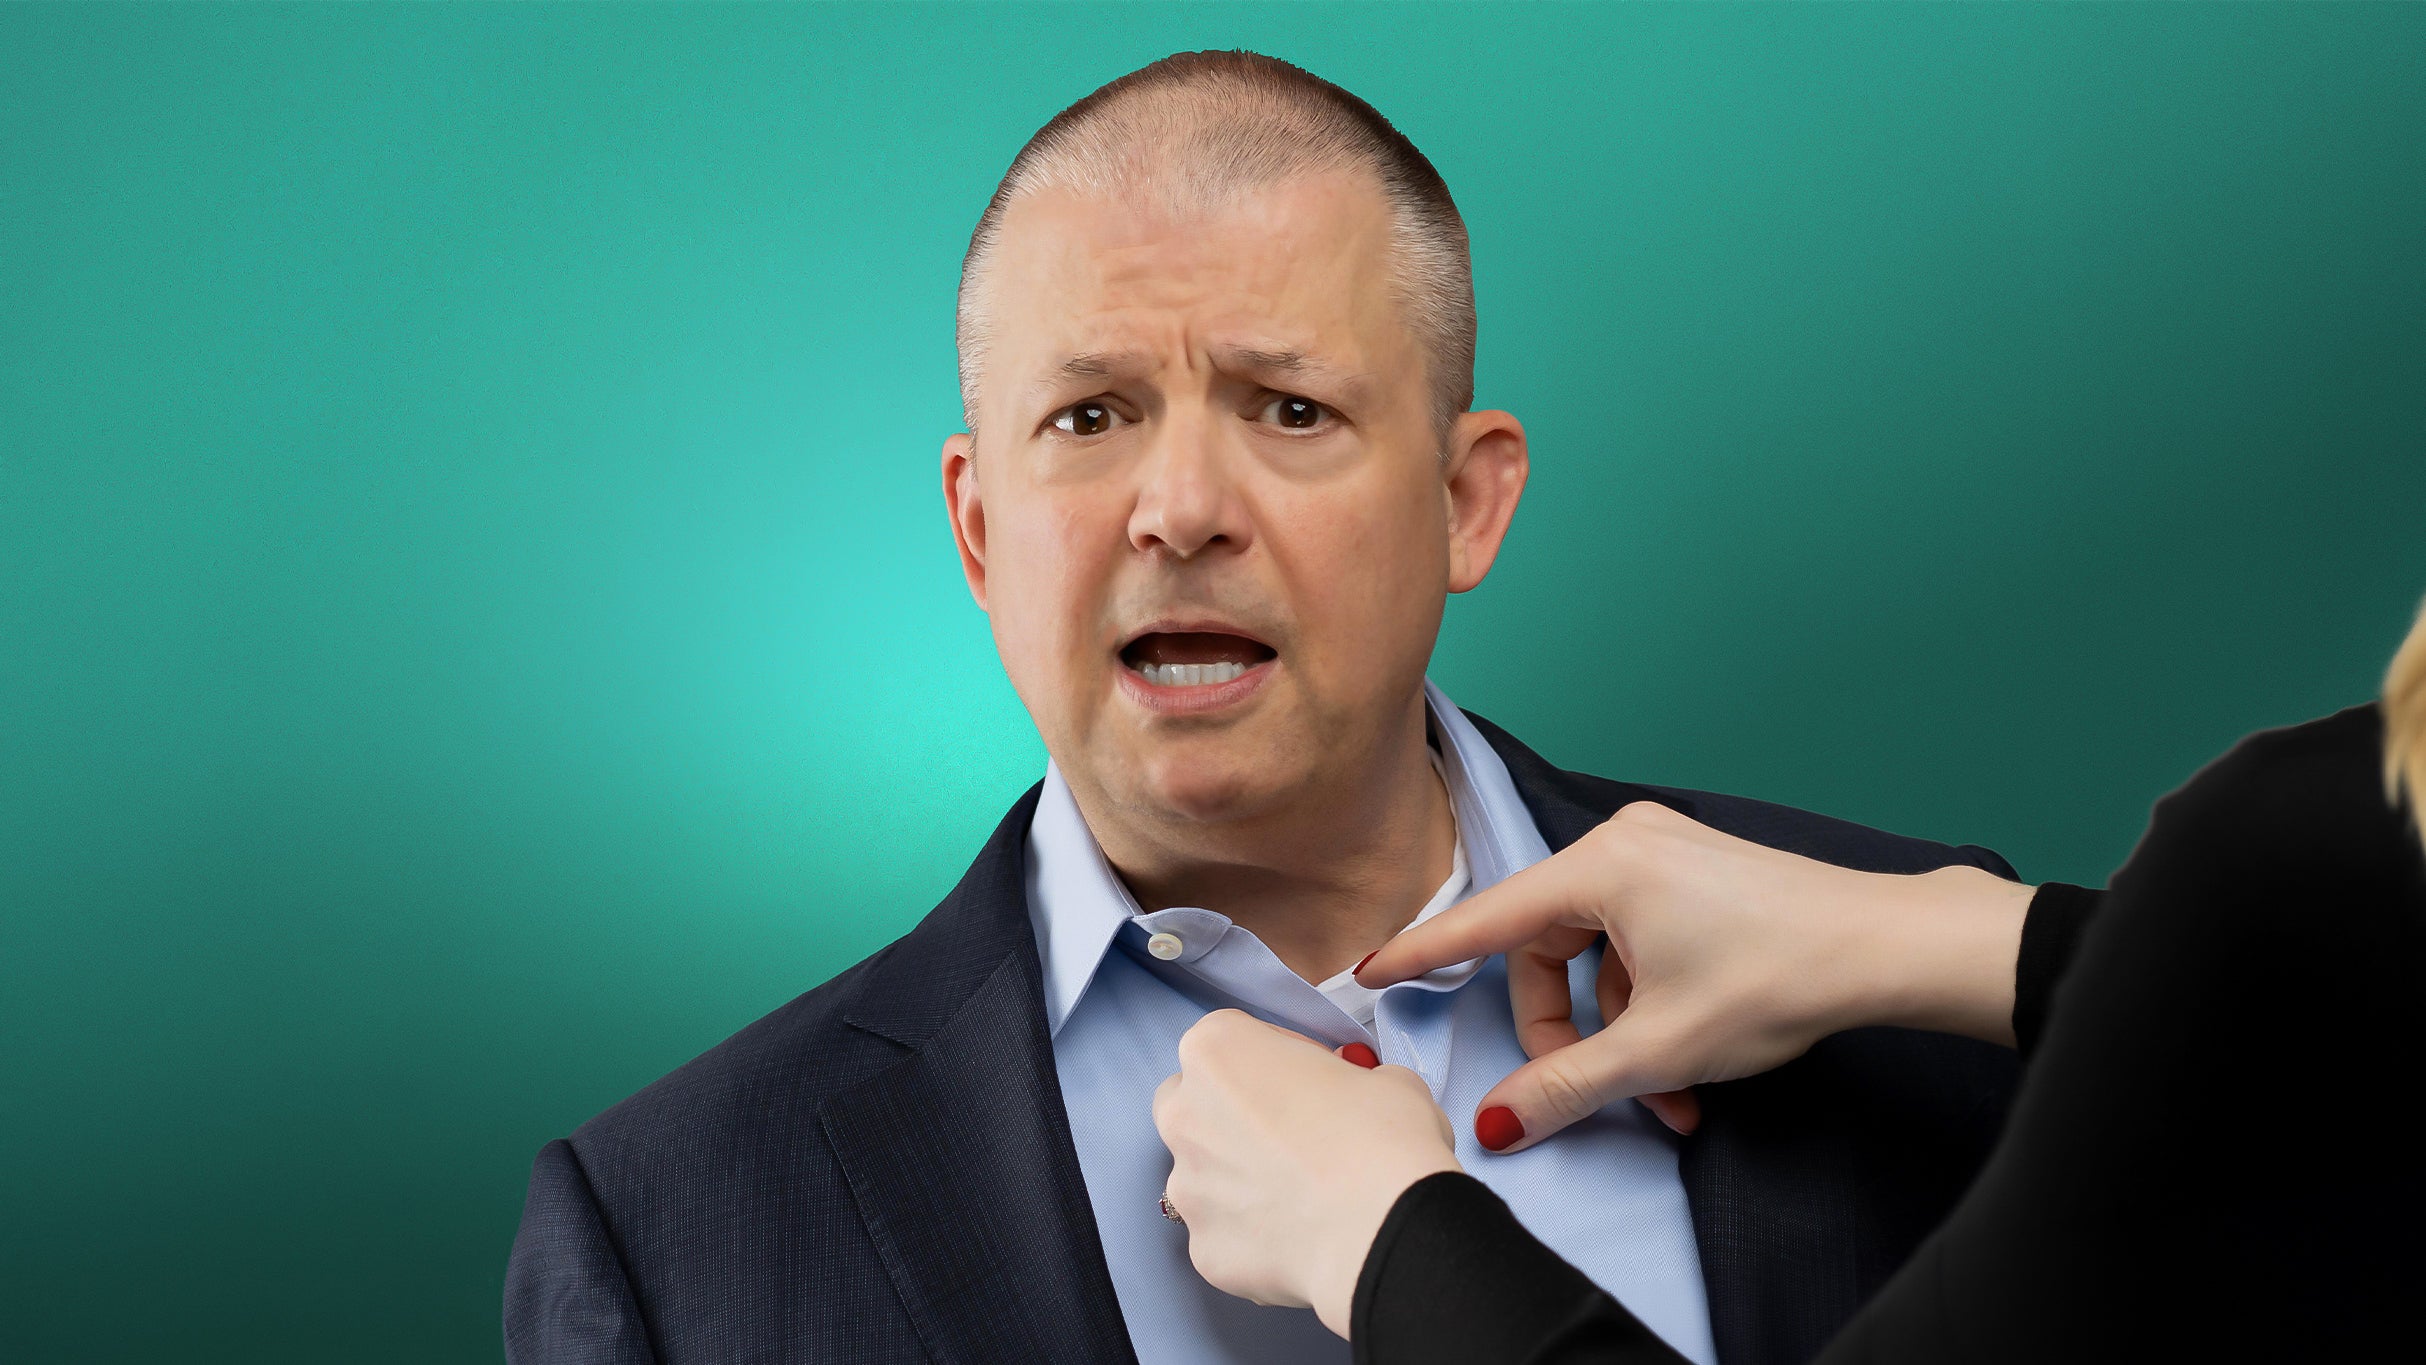 Jim Norton: Now You Know (Fully Seated 18+) in Pittsburgh promo photo for Official Platinum presale offer code